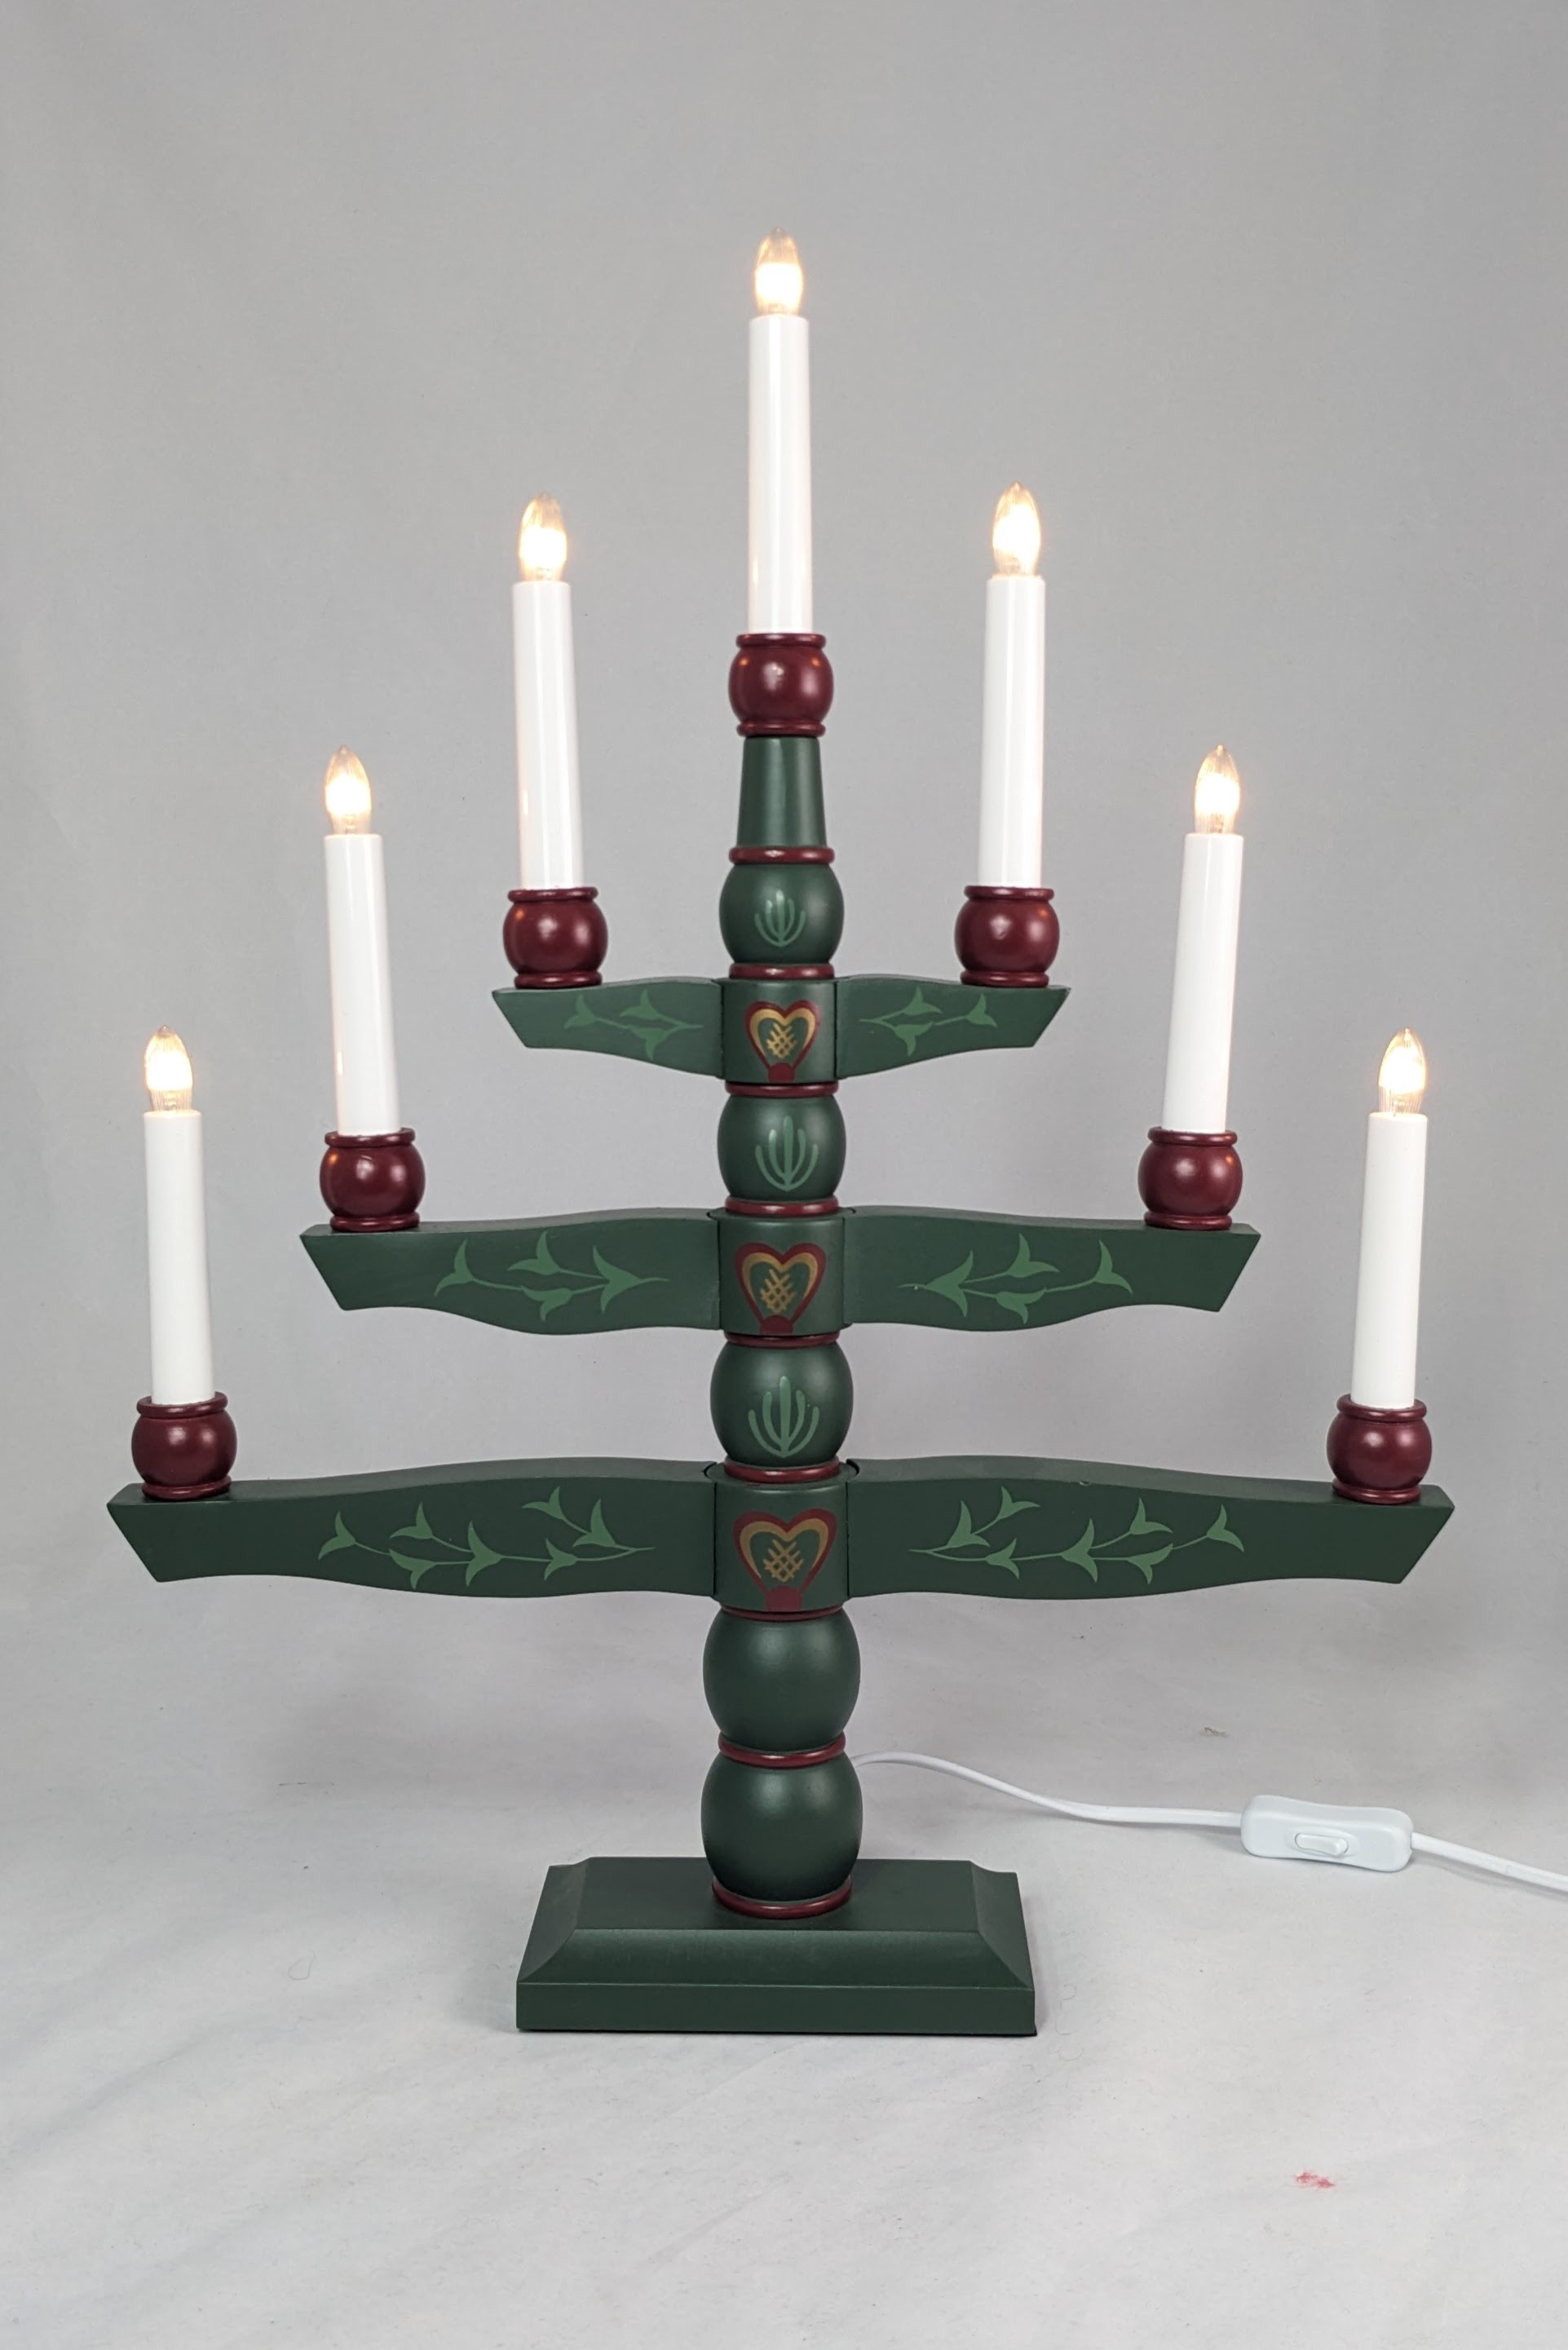 Green candelabra with 7 lights, on 3 branches and one light on each side. Each branch gets smaller as it reaches the top, resembling a tree. 